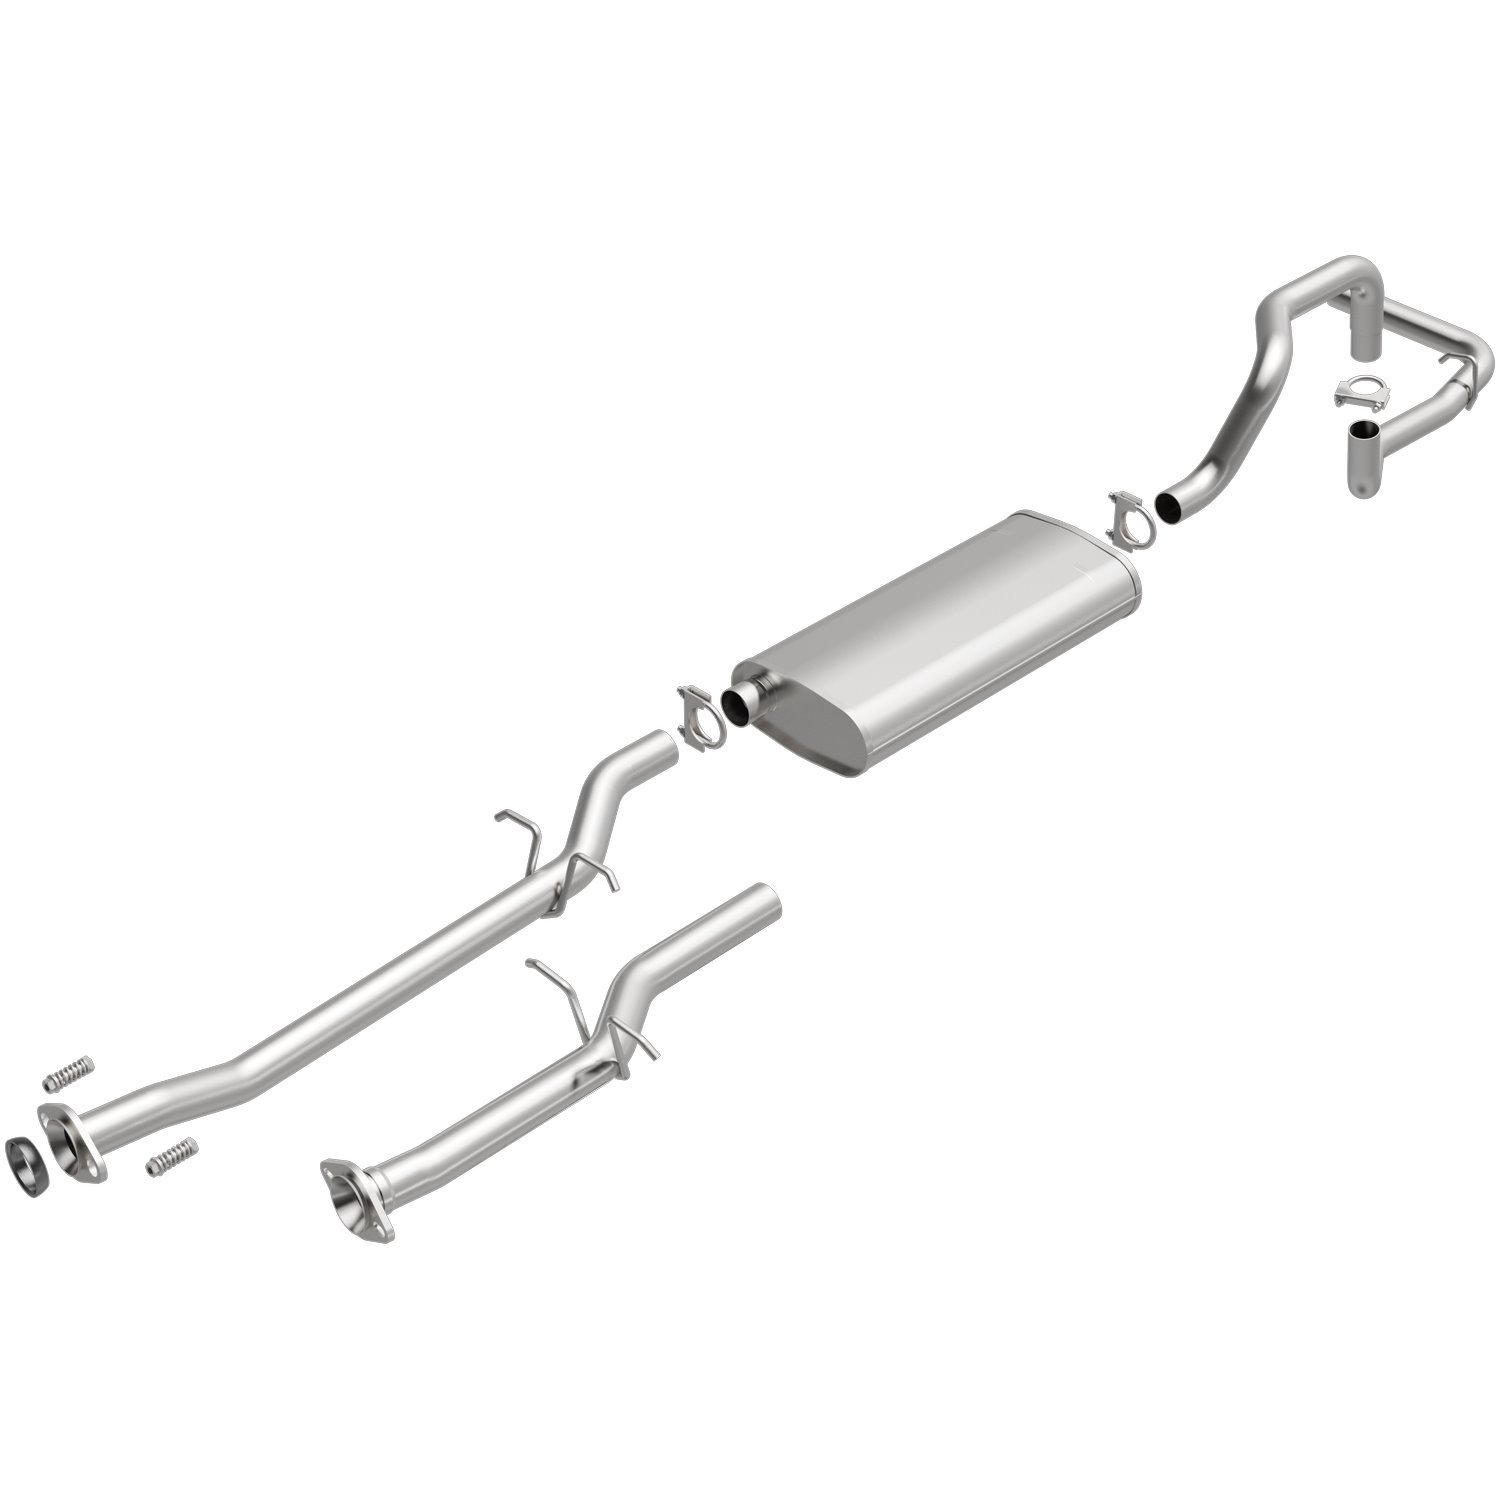 Direct-Fit Exhaust Kit, 1994-1997 Ford Ranger, Mercury